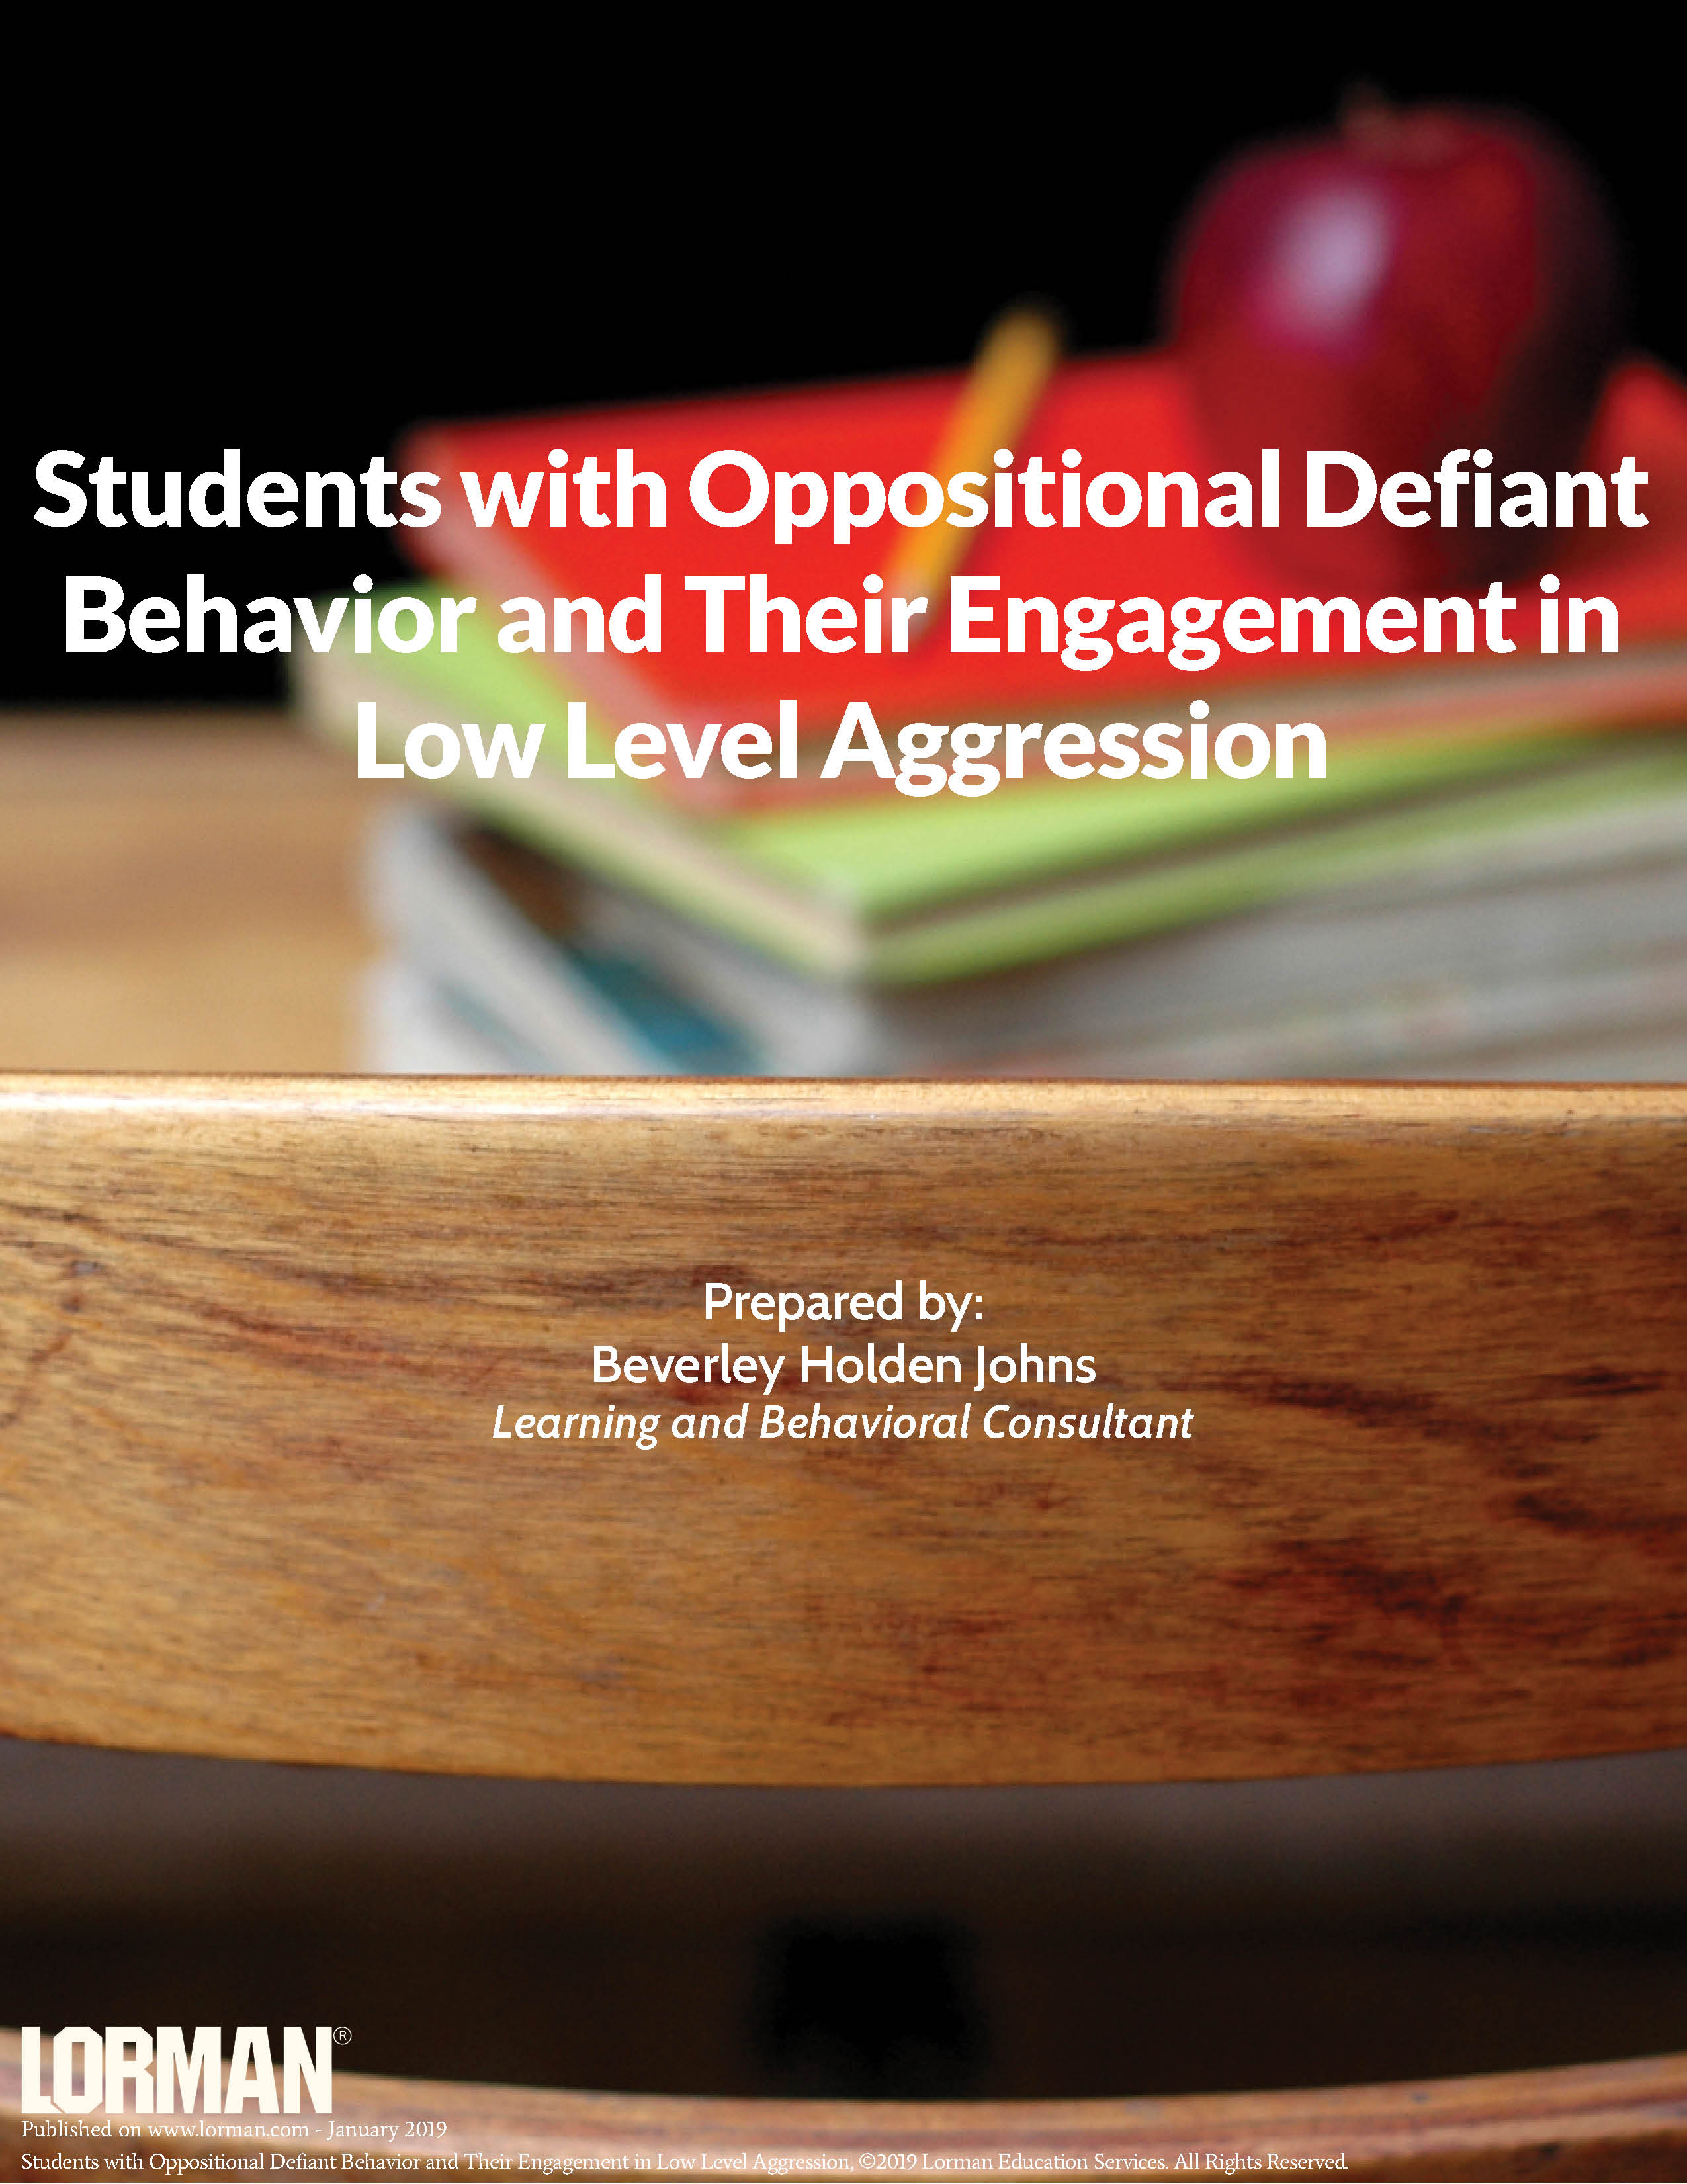 Students with Oppositional Defiant Behavior and Their Engagement in Low Level Aggression